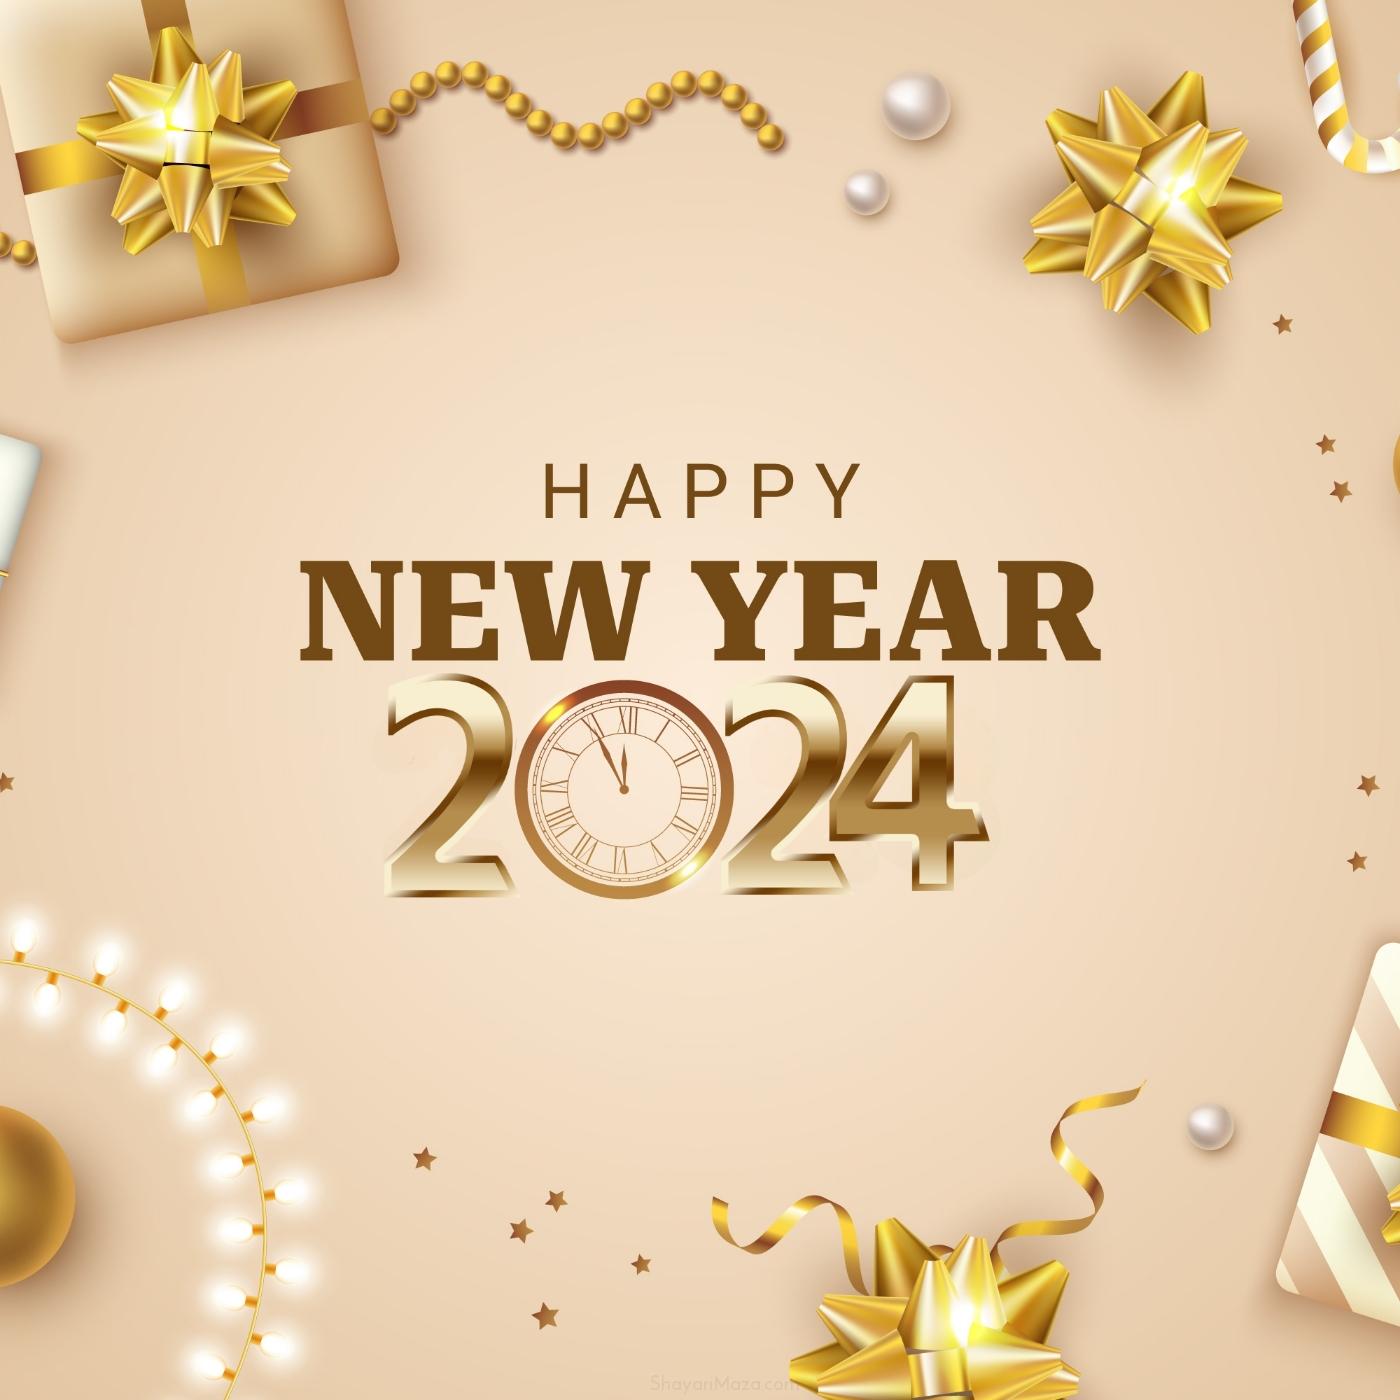 Happy New Year 2024 Images With Clock